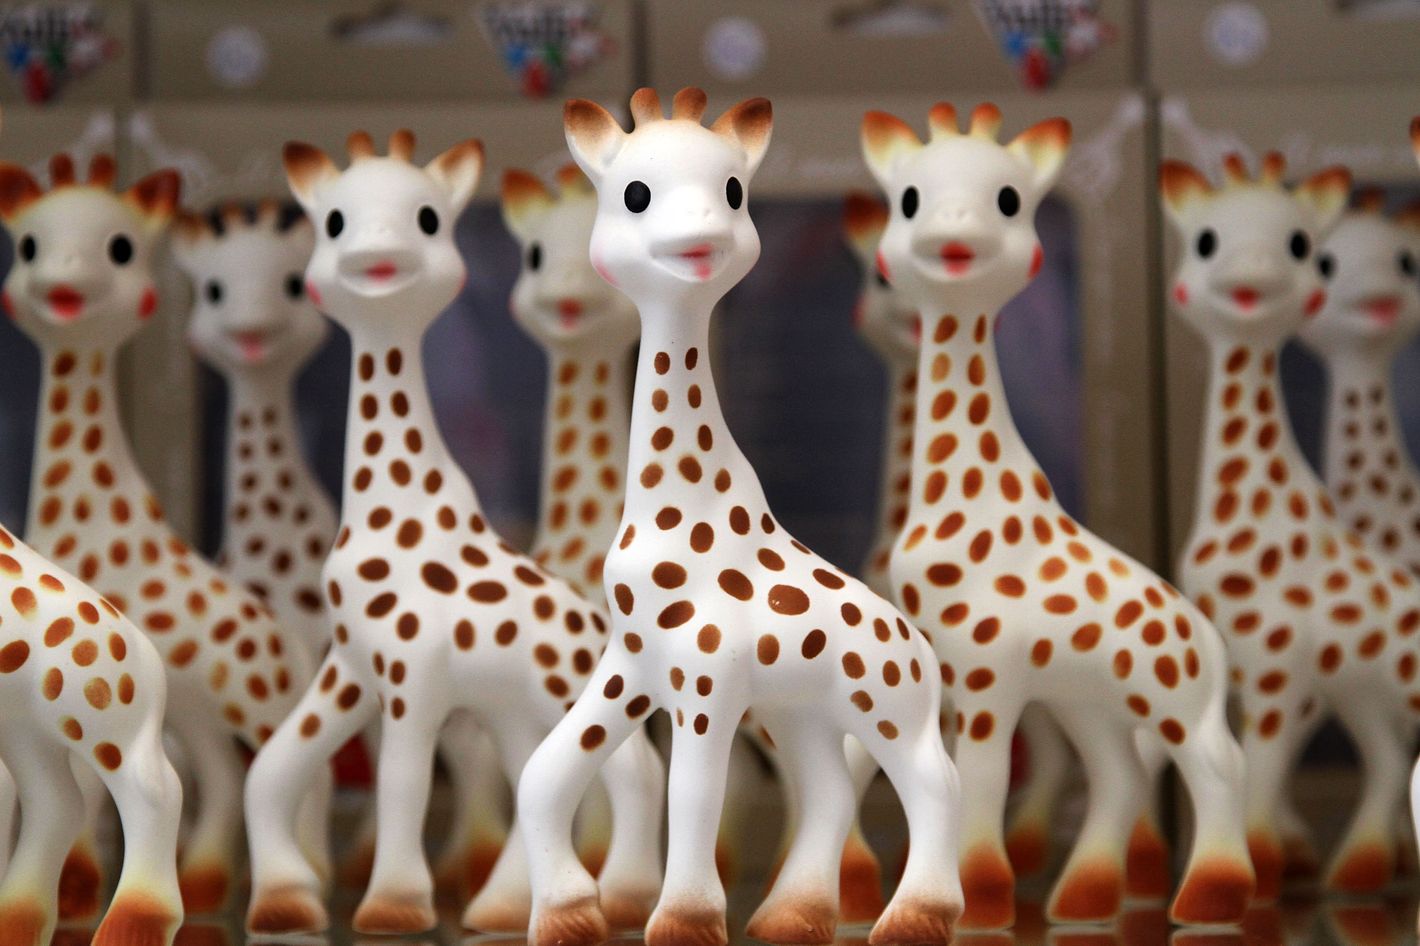 Parents Discover Black Mold in Sophie the Giraffe Toy